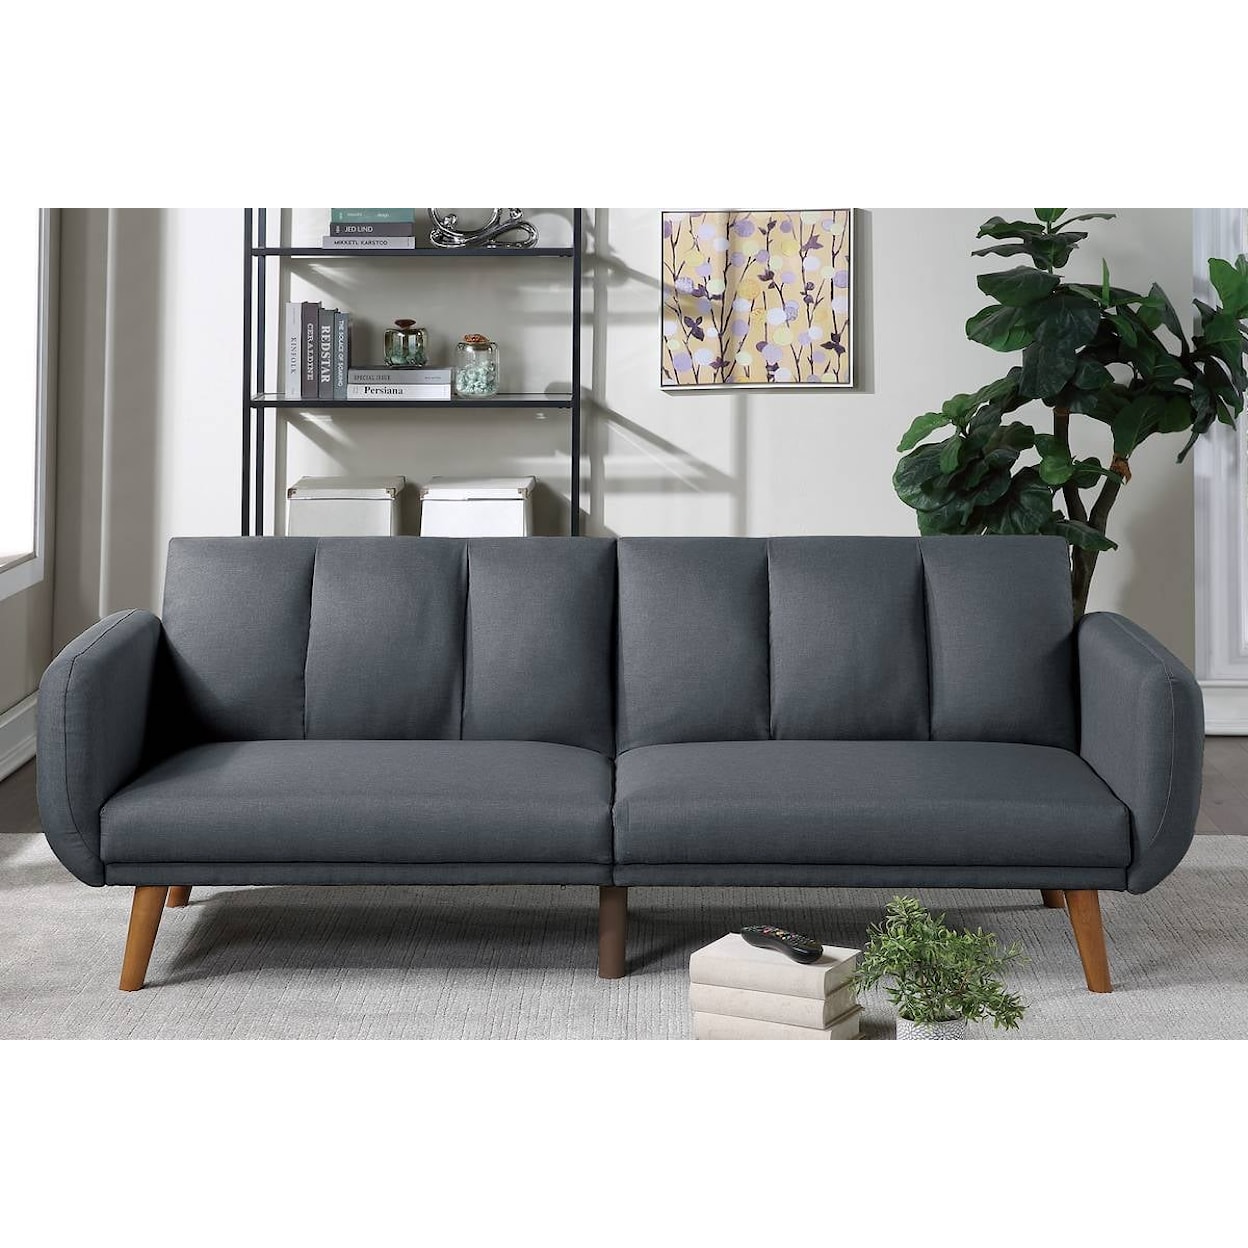 Poundex Sofa Beds PHILLY LIGHT GREY SOFA BED |